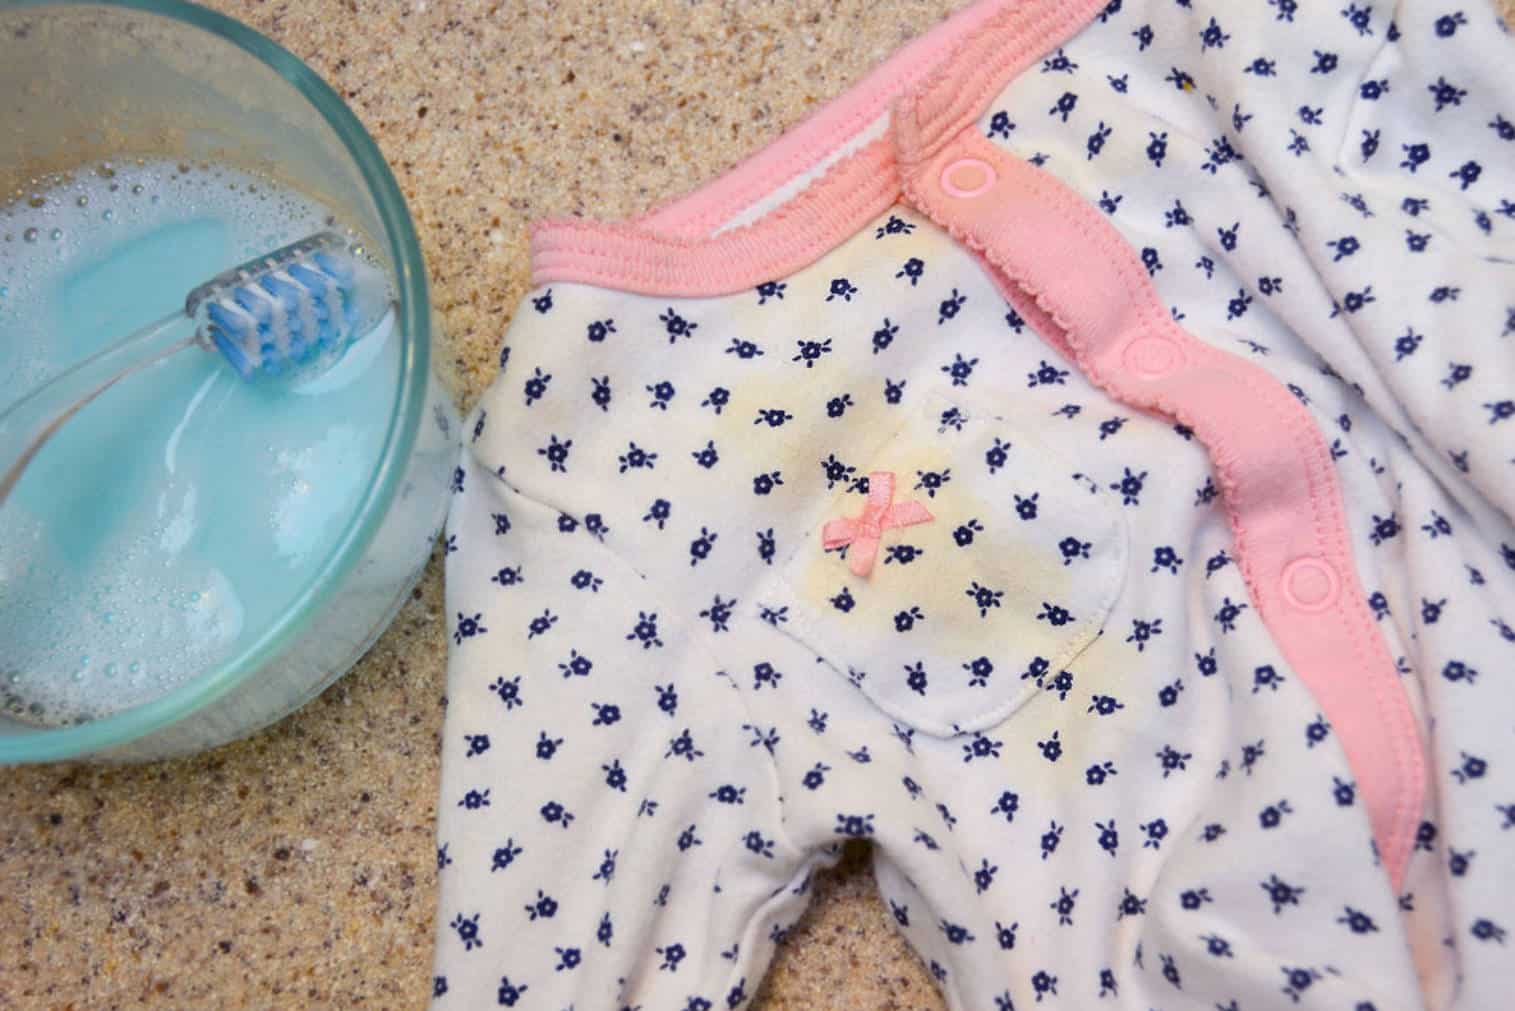 removing stains from baby clothes